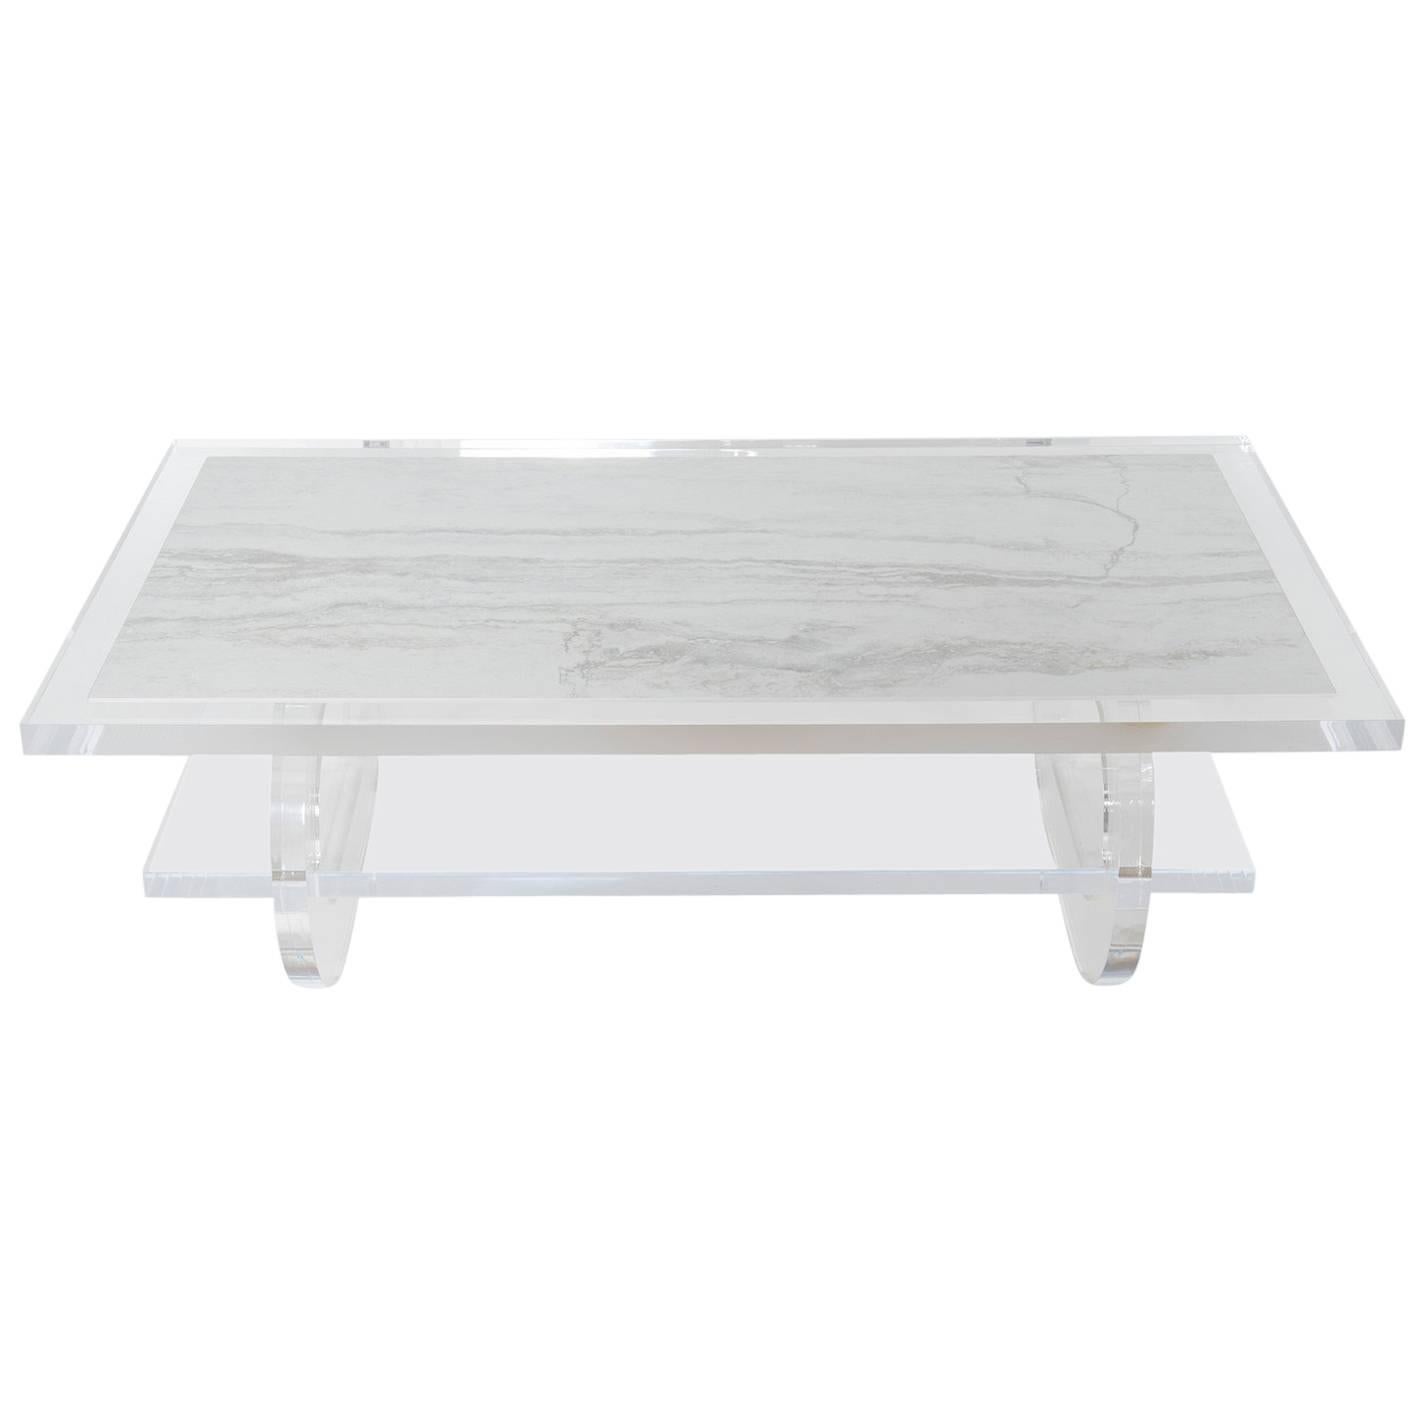 Two-Tiered Lucite Cocktail Table with Marble Inset Top